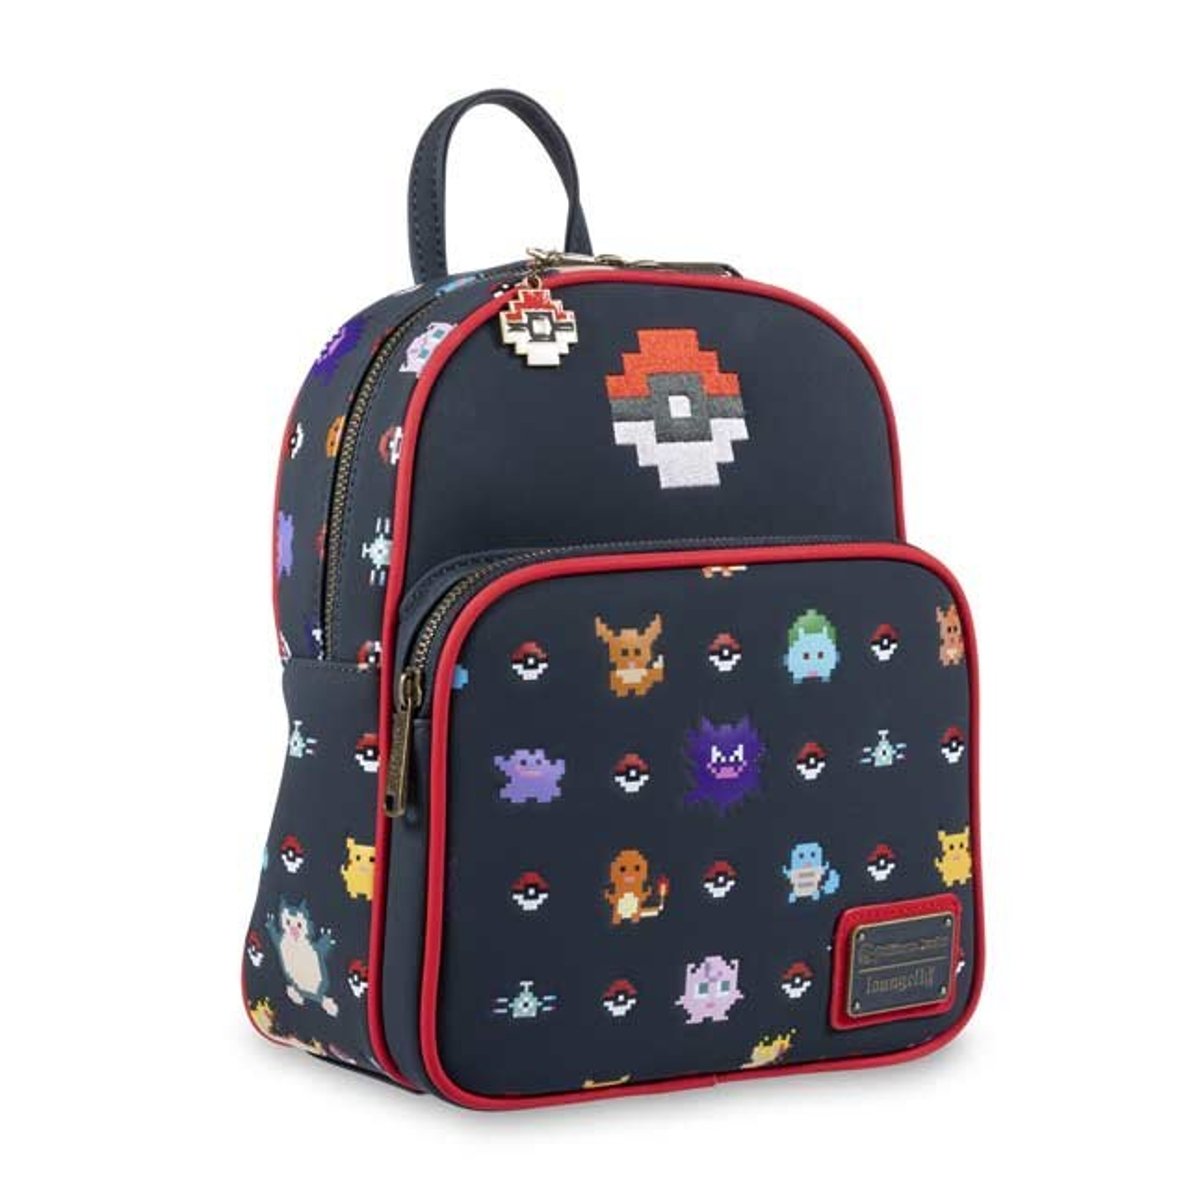 Pokémon Block Art Convertible Backpack by Loungefly